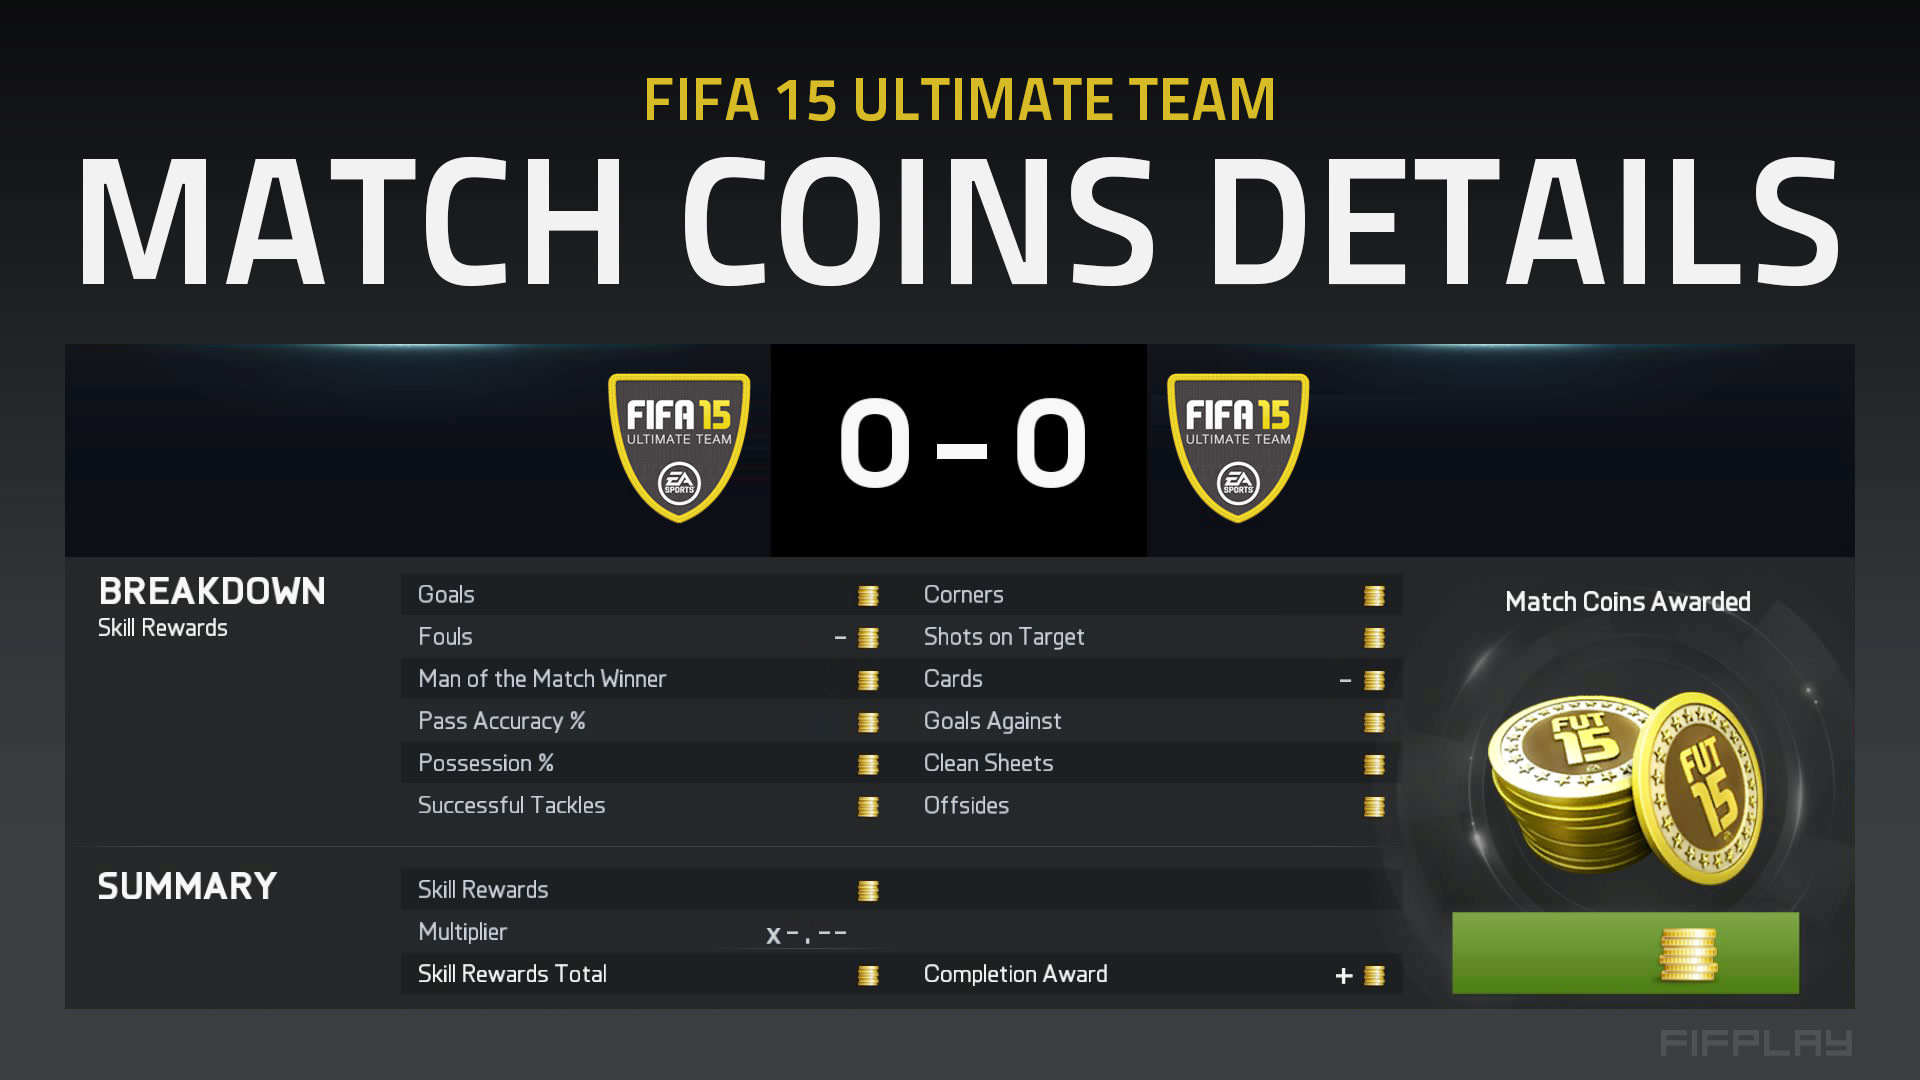 FIFA 15 Ultimate Team Match Coins